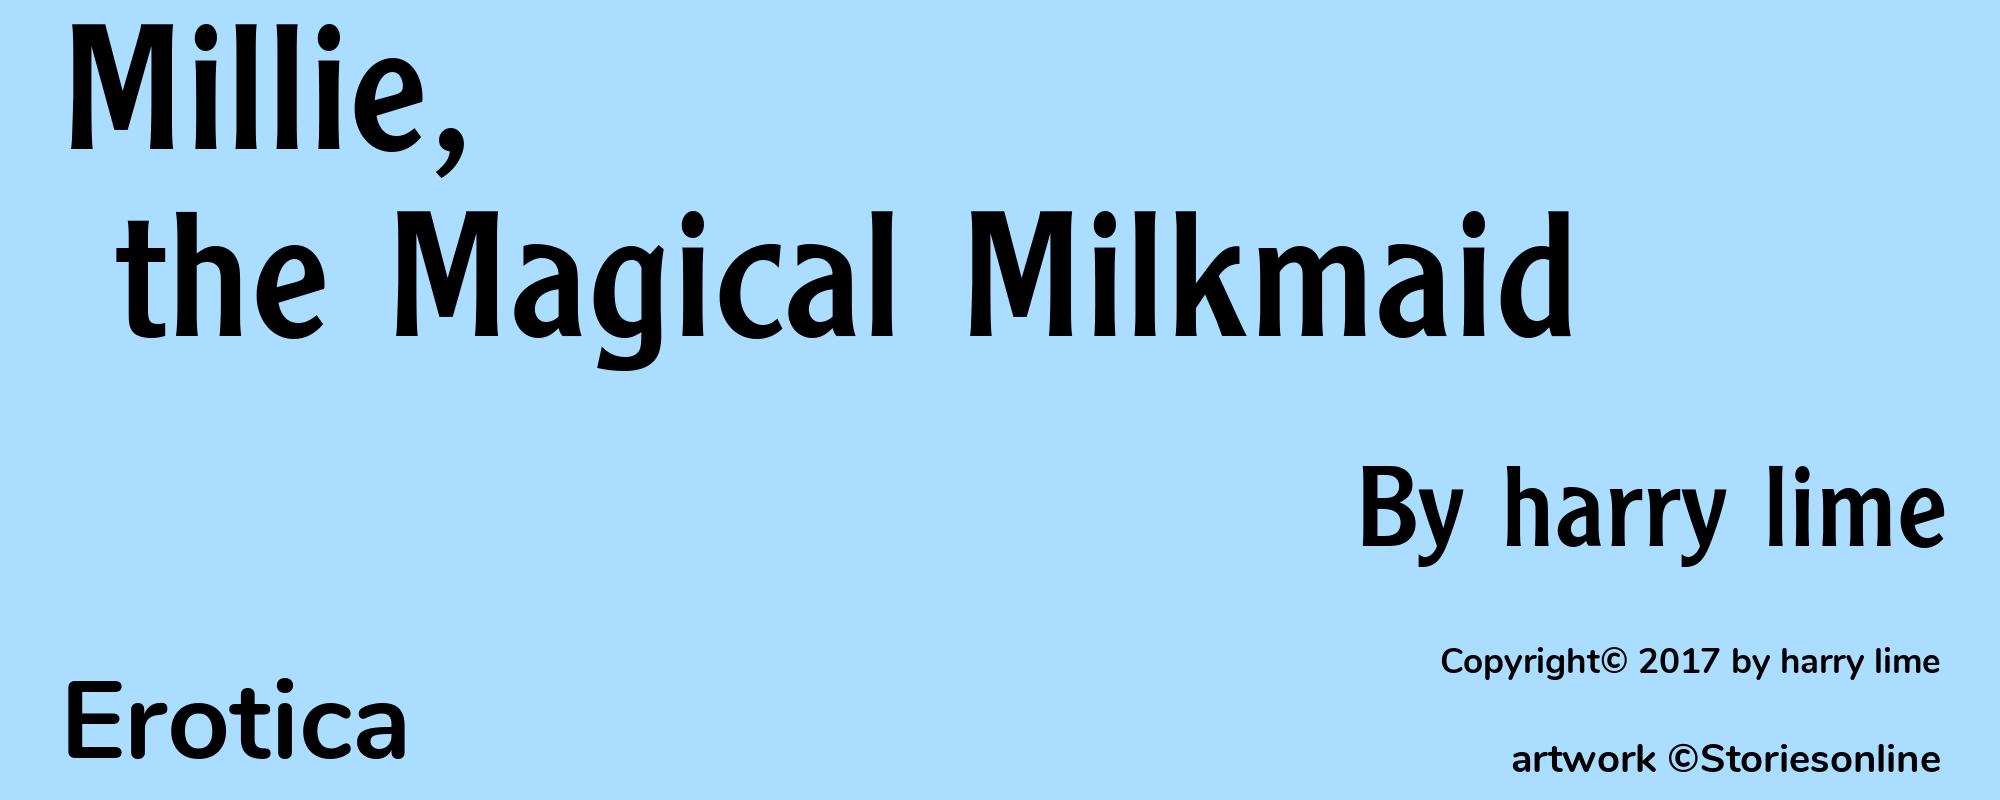 Millie, the Magical Milkmaid - Cover